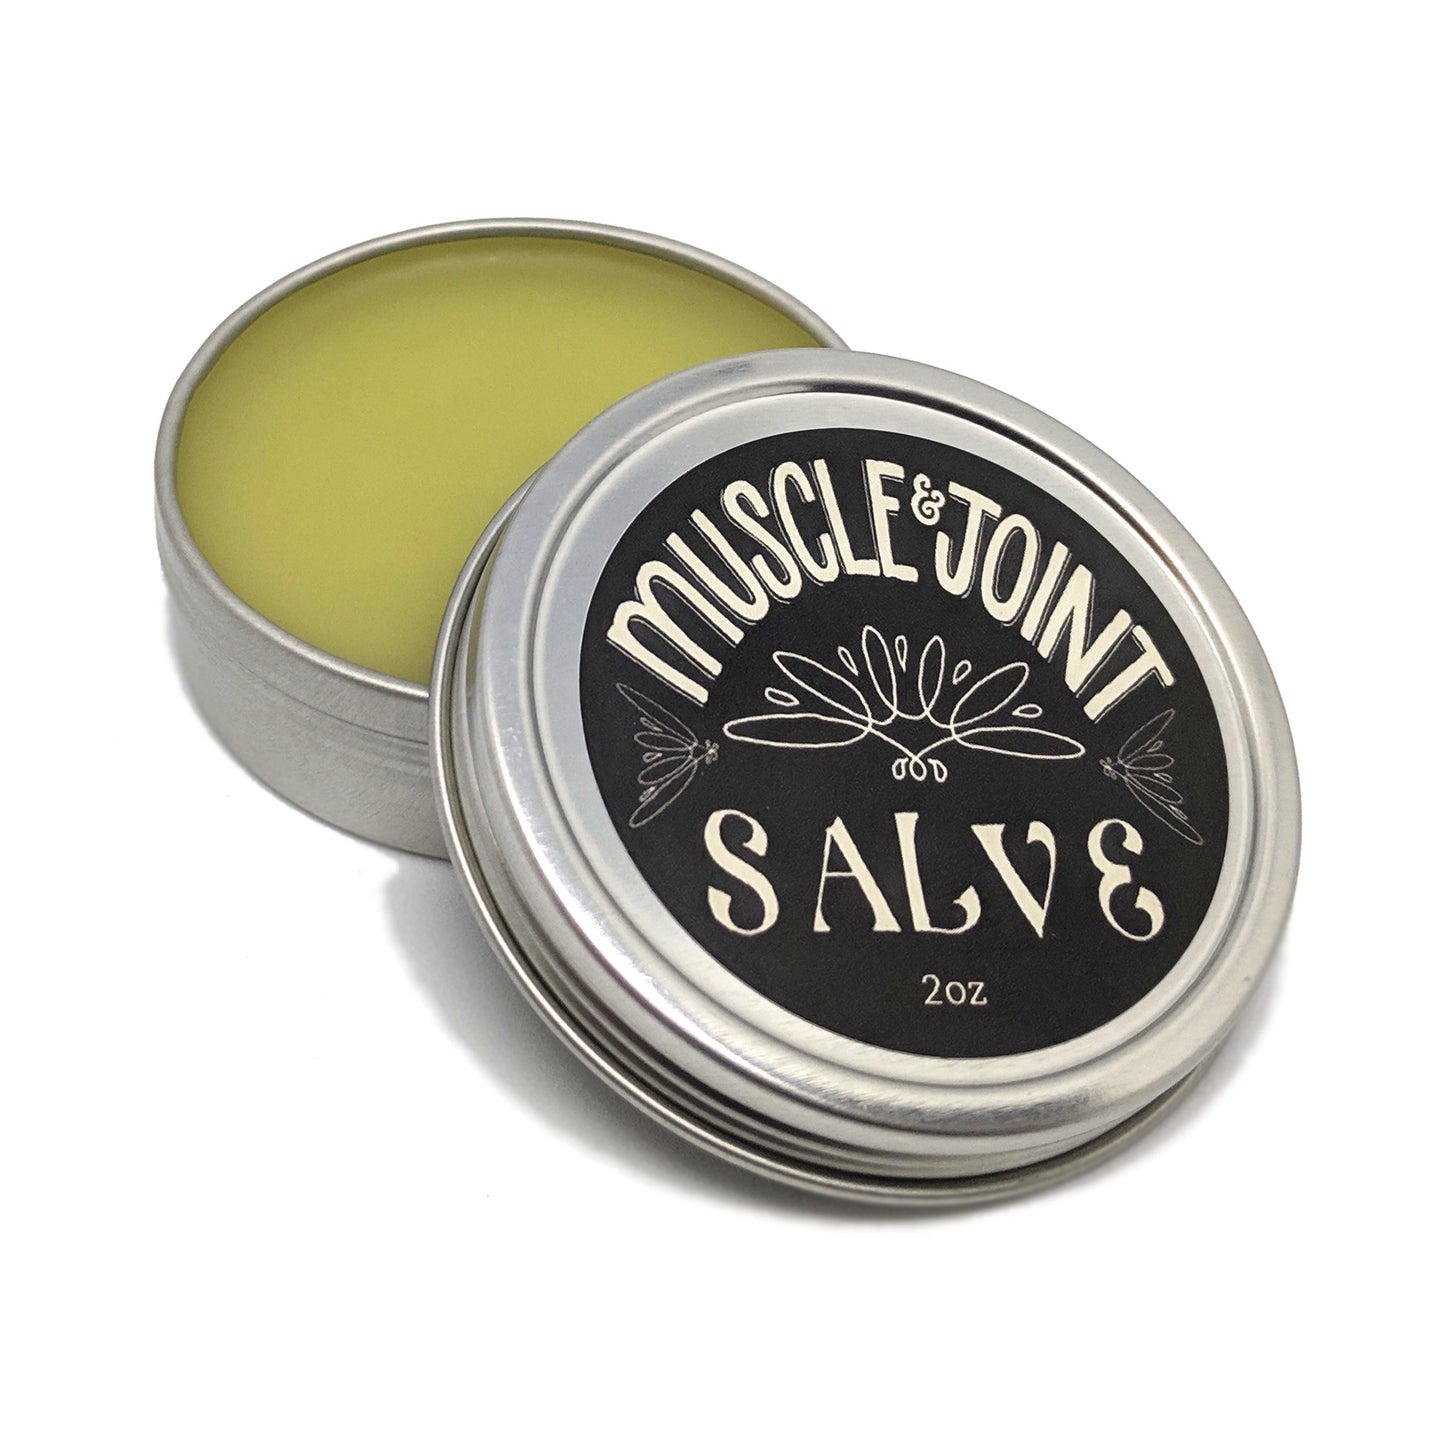 Muscle & Joint Herbal Salve - 2oz